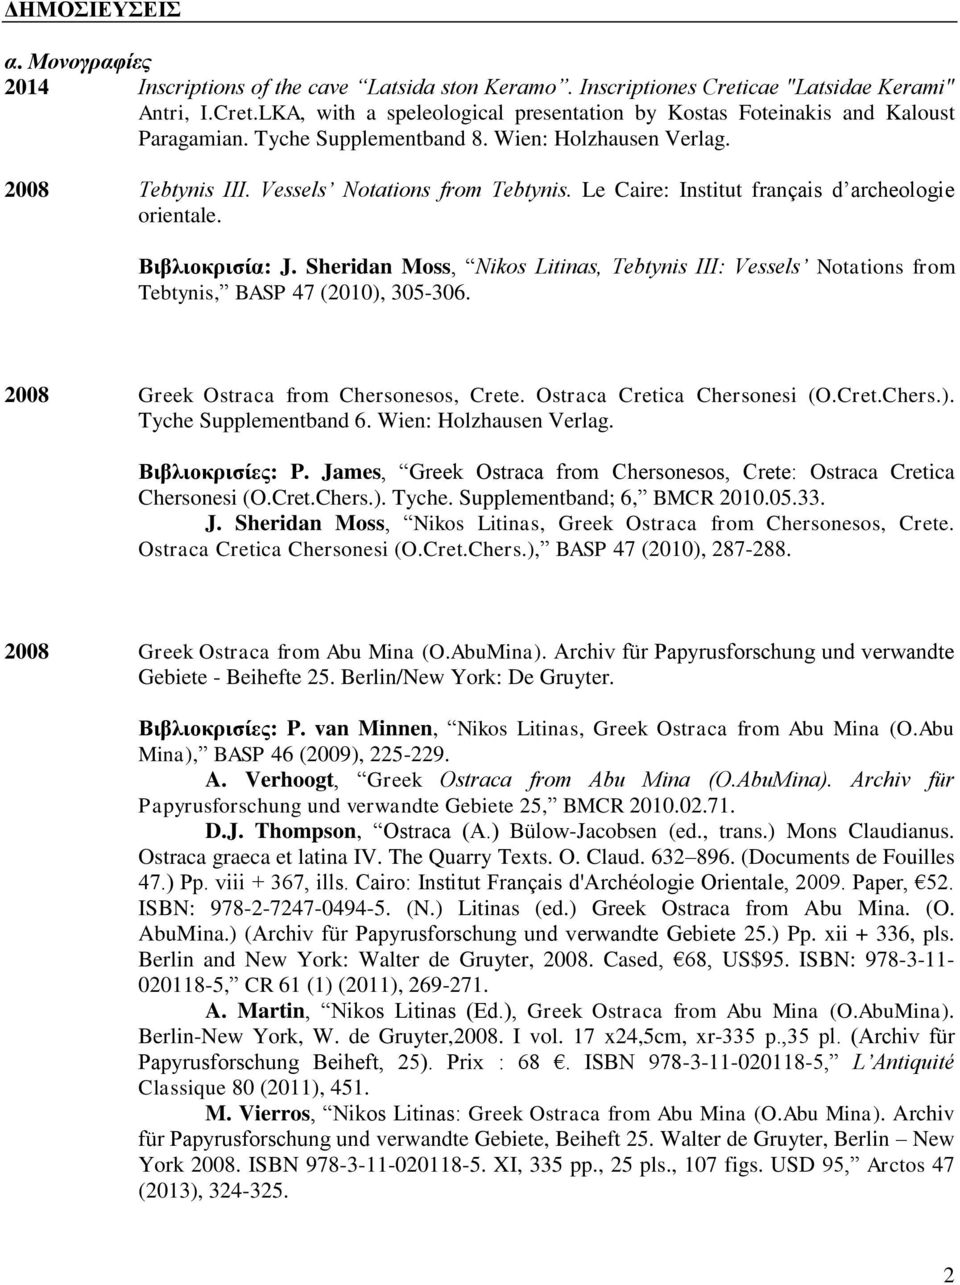 Sheridan Moss, Nikos Litinas, Tebtynis III: Vessels Notations from Tebtynis, BASP 47 (2010), 305-306. 2008 Greek Ostraca from Chersonesos, Crete. Ostraca Cretica Chersonesi (O.Cret.Chers.). Tyche Supplementband 6.